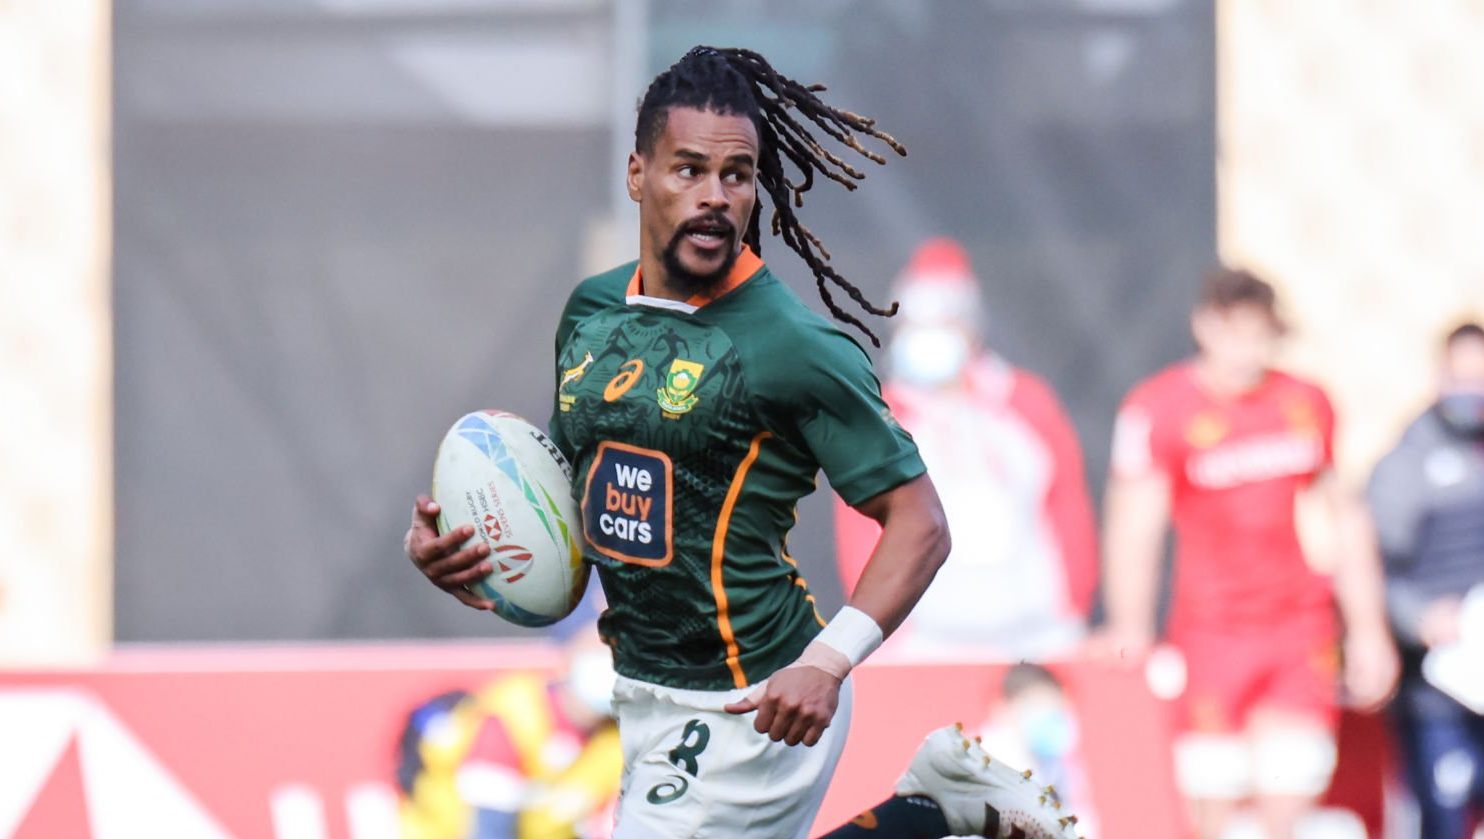 Selvyn Davis of South Africa runs with the ball during the Men's HSBC World Rugby Sevens Series 2022 match between Spain and South Africa at the La Cartuja stadium in Seville, on January 29, 2022. (Photo by DAX Images/NurPhoto via Getty Images)